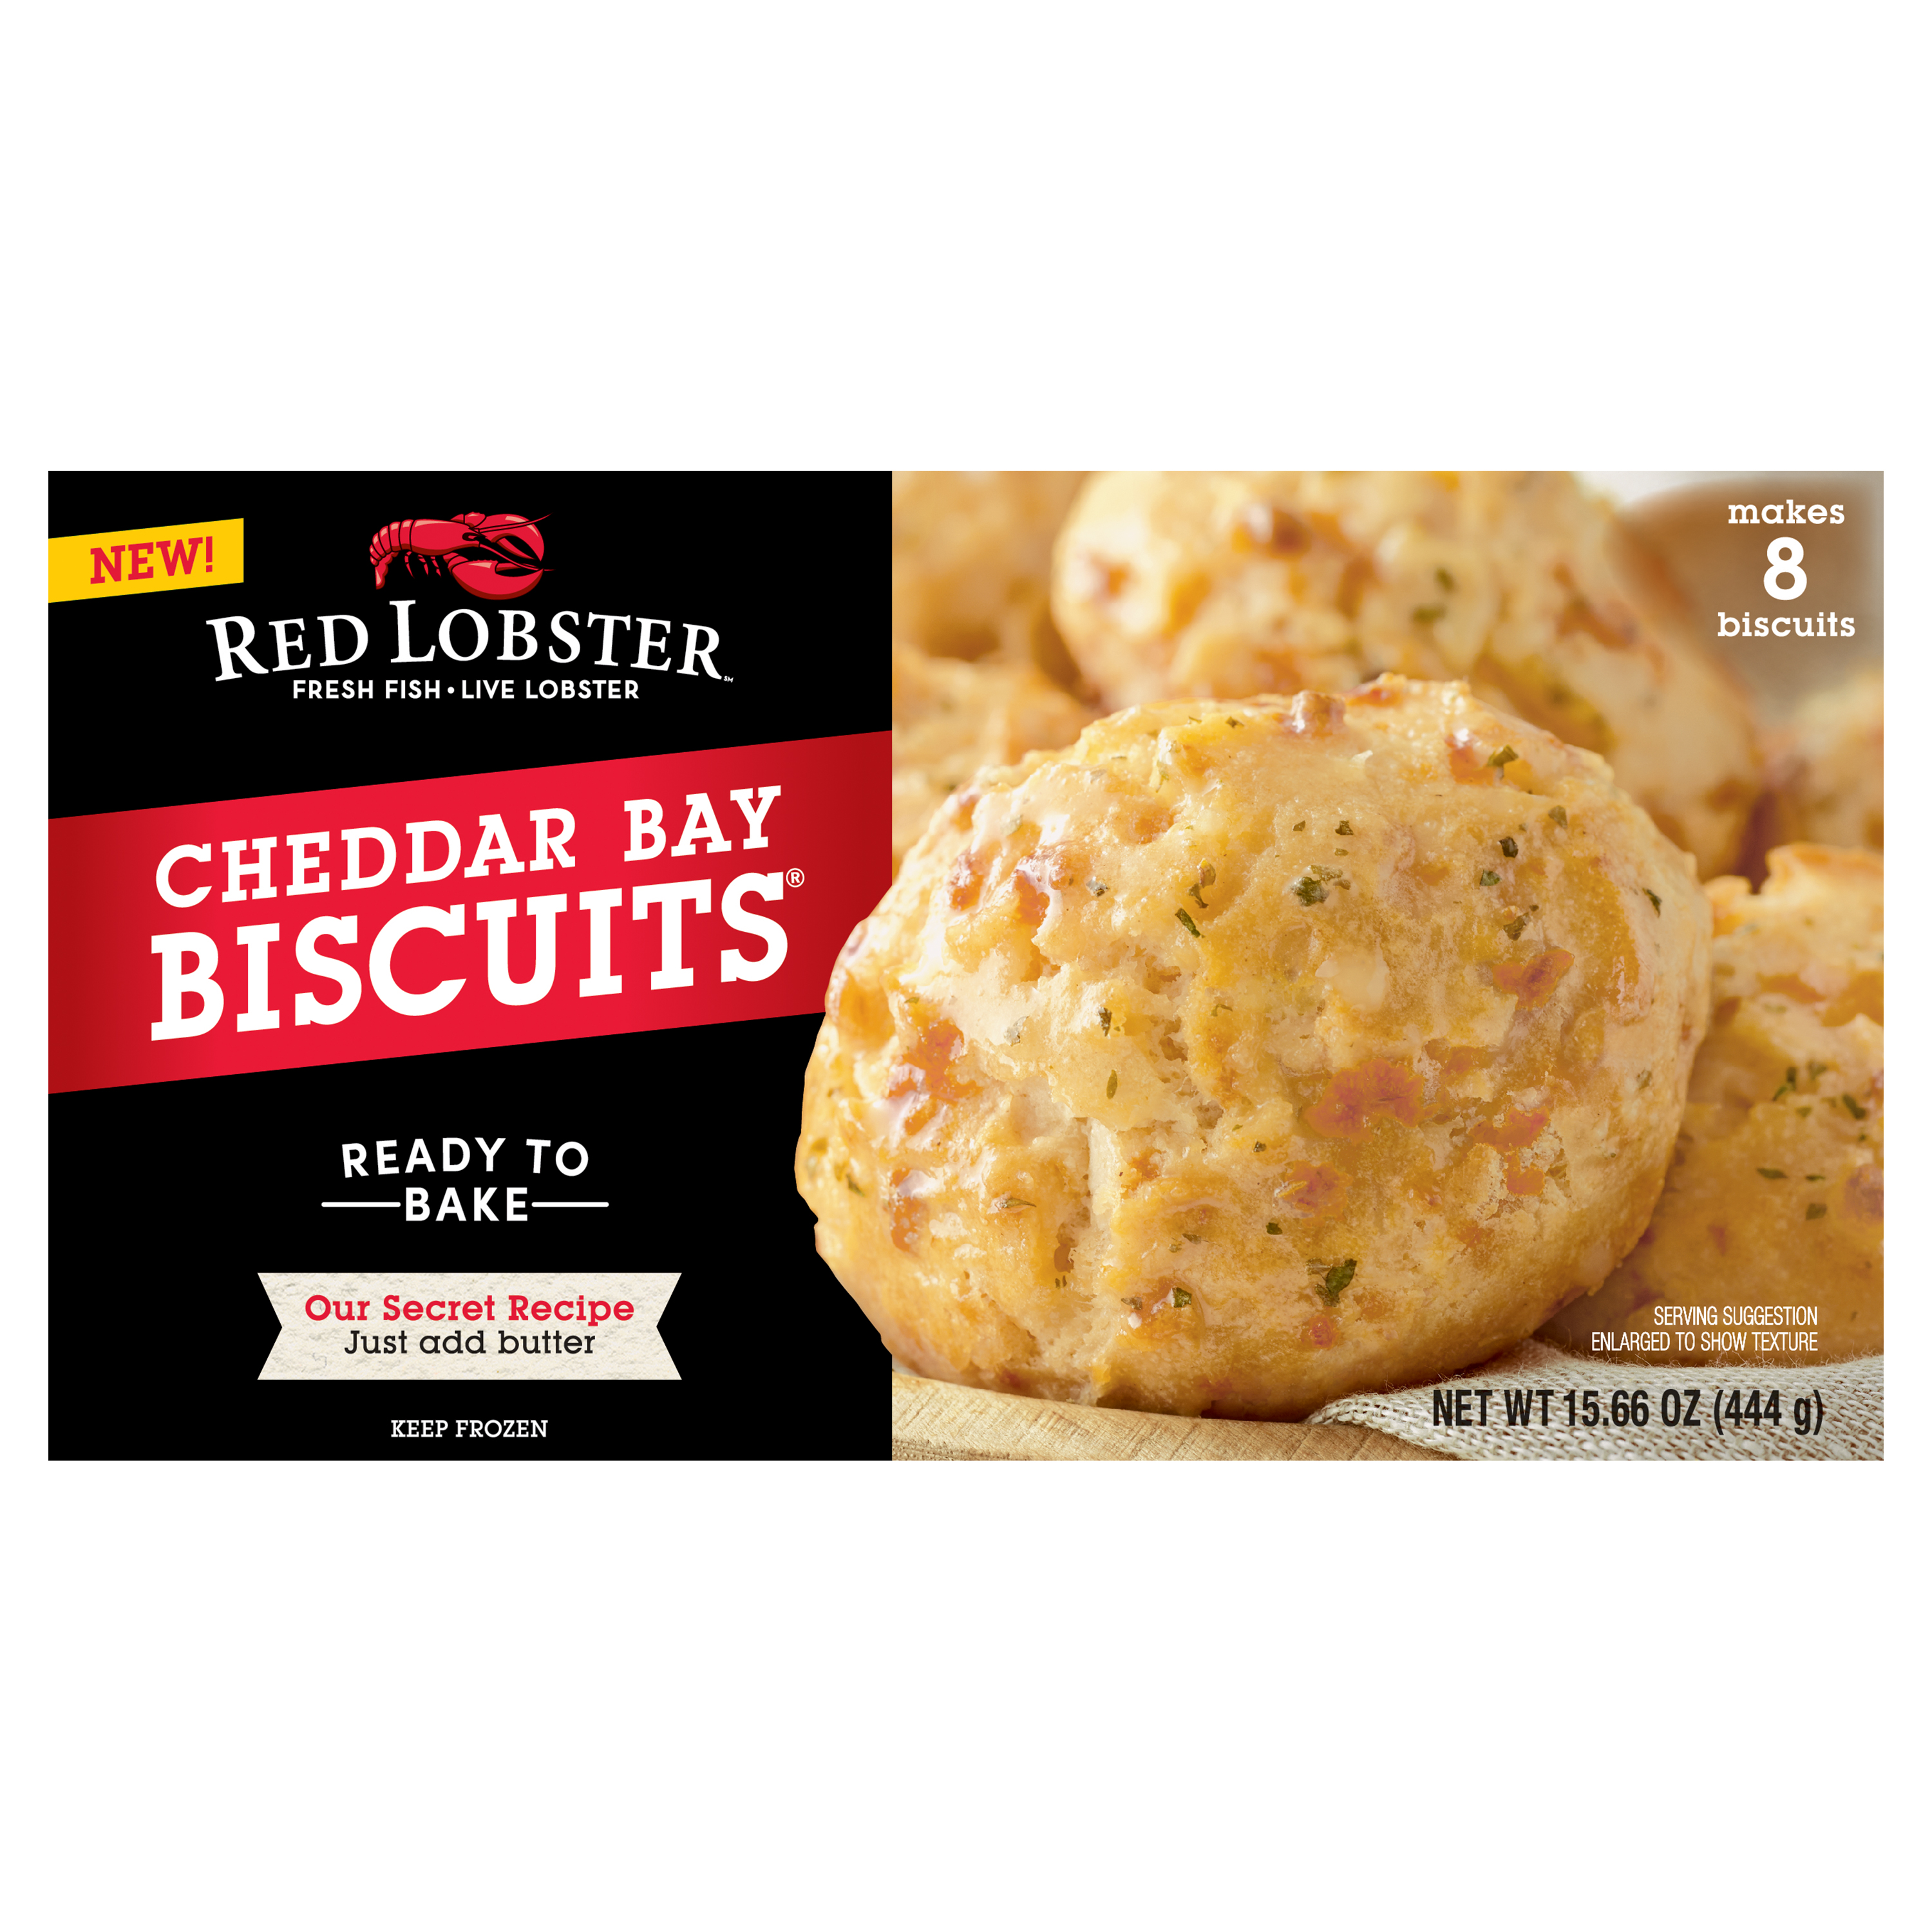 Red Lobster Cheddar Bay Frozen Biscuits, Ready to Bake, Makes 8 Biscuits, 15.66 oz Box - image 1 of 7